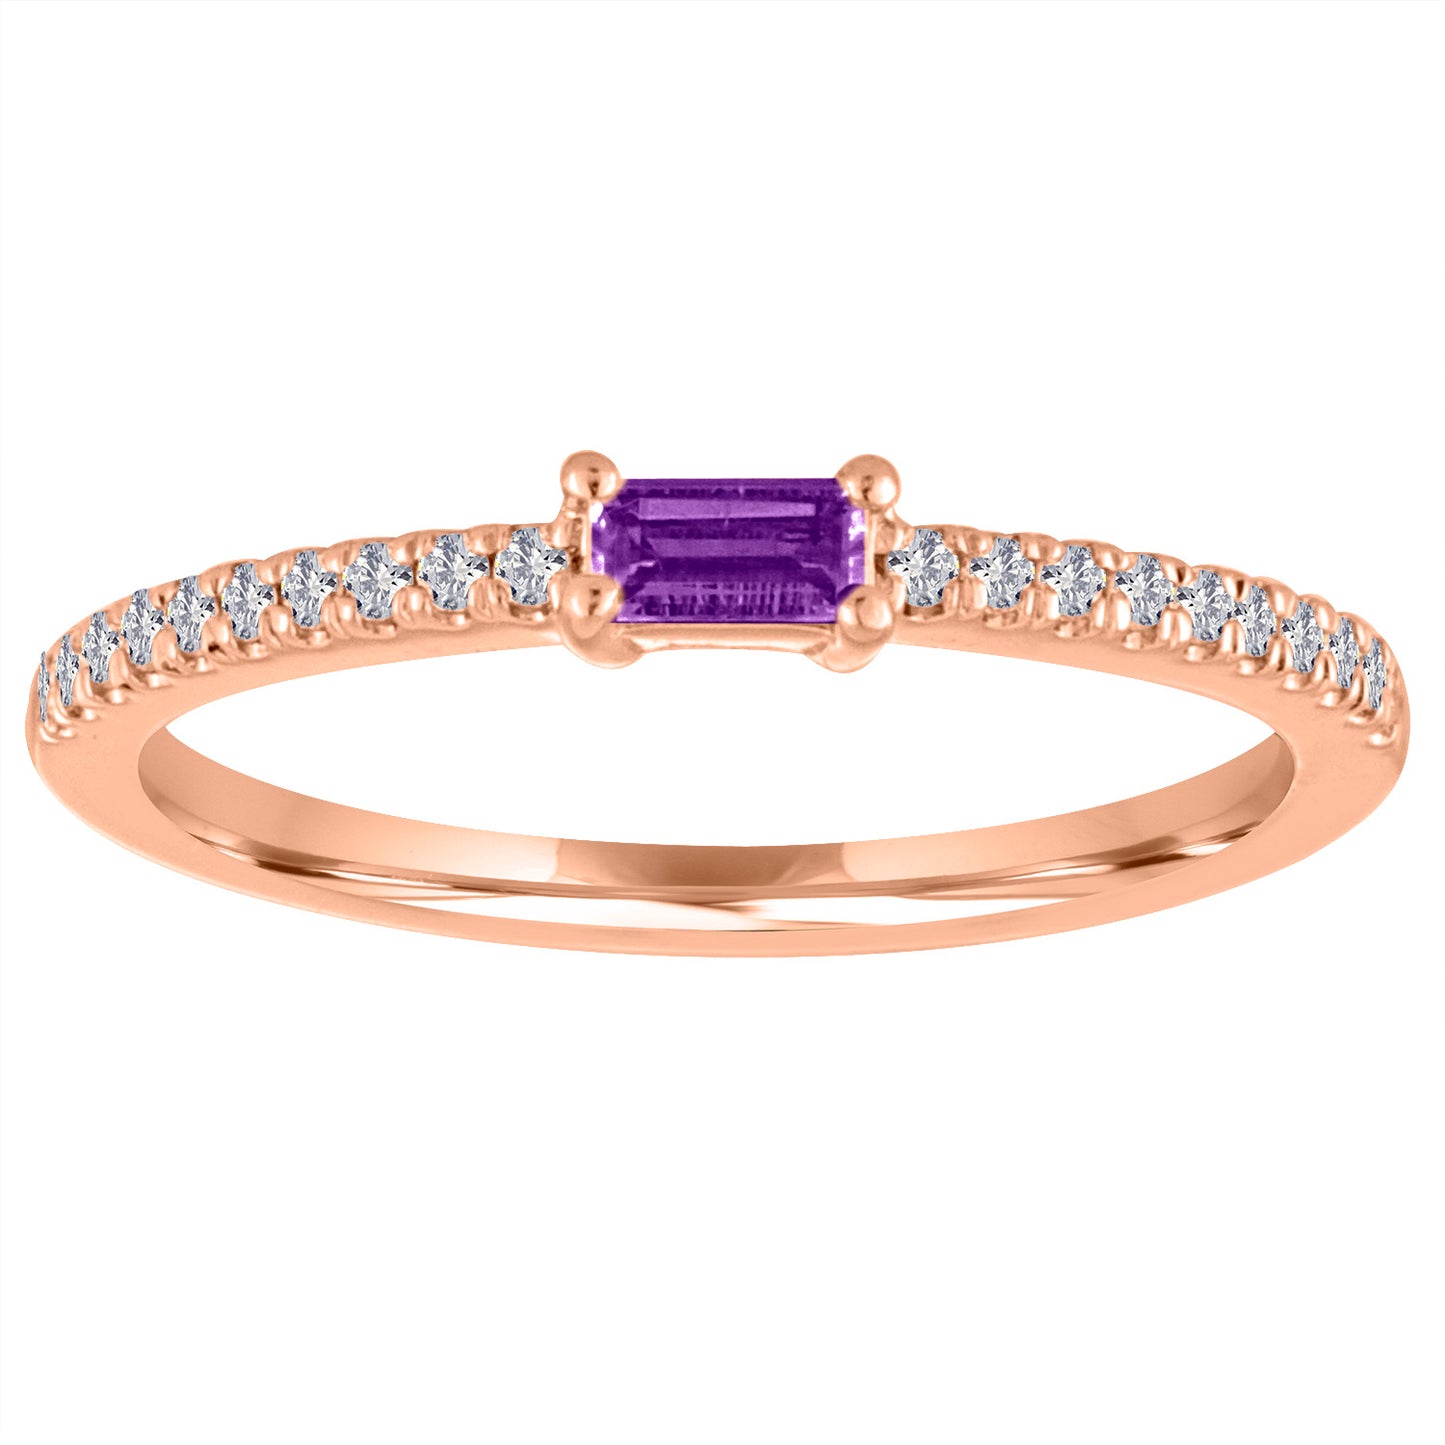 Rose gold skinny band with an amethyst baguette in the center and round diamonds on the shank. 